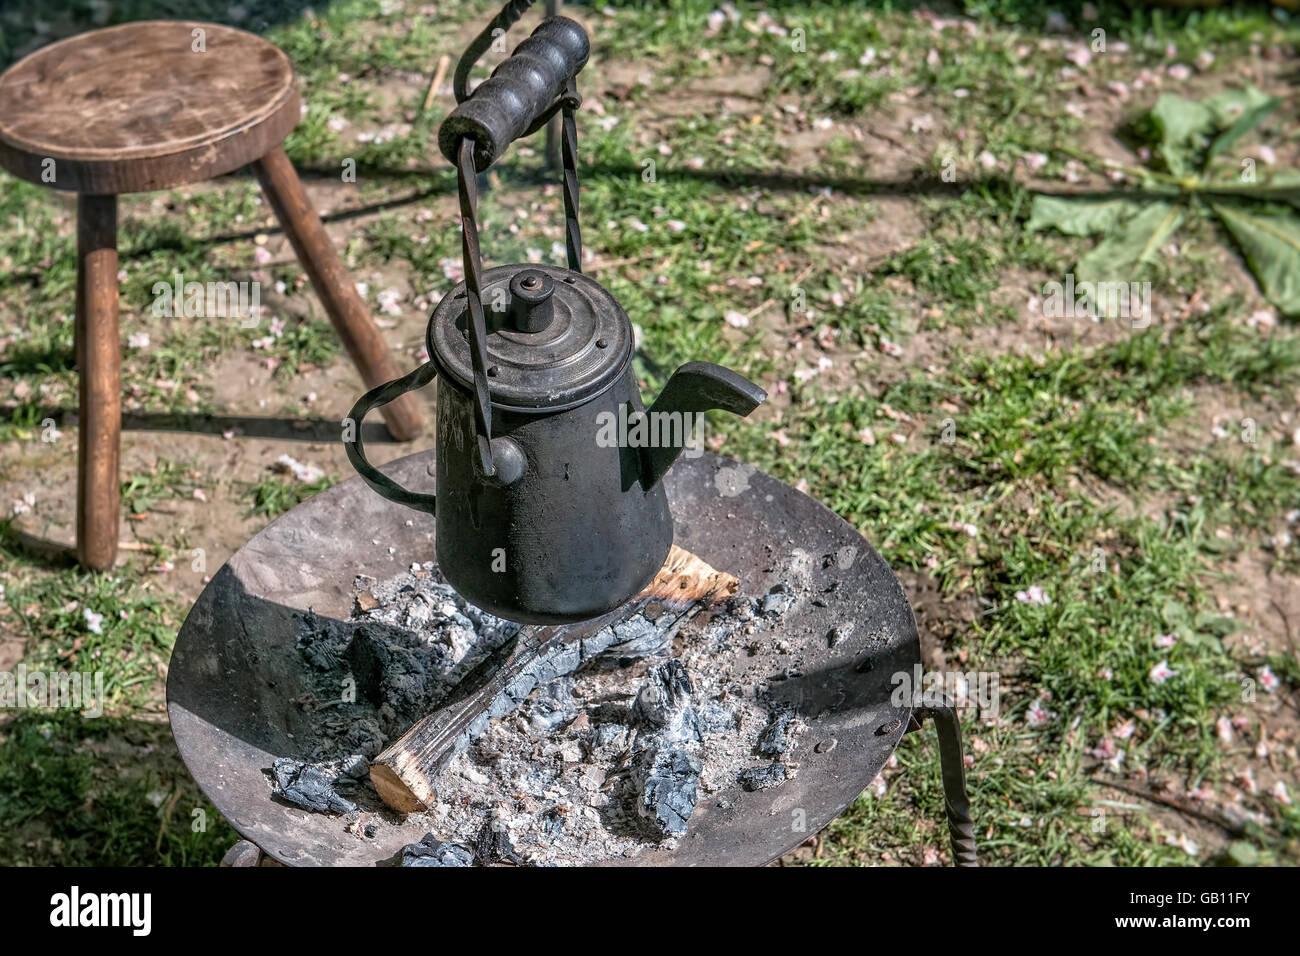 https://c8.alamy.com/comp/GB11FY/reconstruction-of-medieval-way-to-prepare-a-hot-drink-on-open-fire-GB11FY.jpg